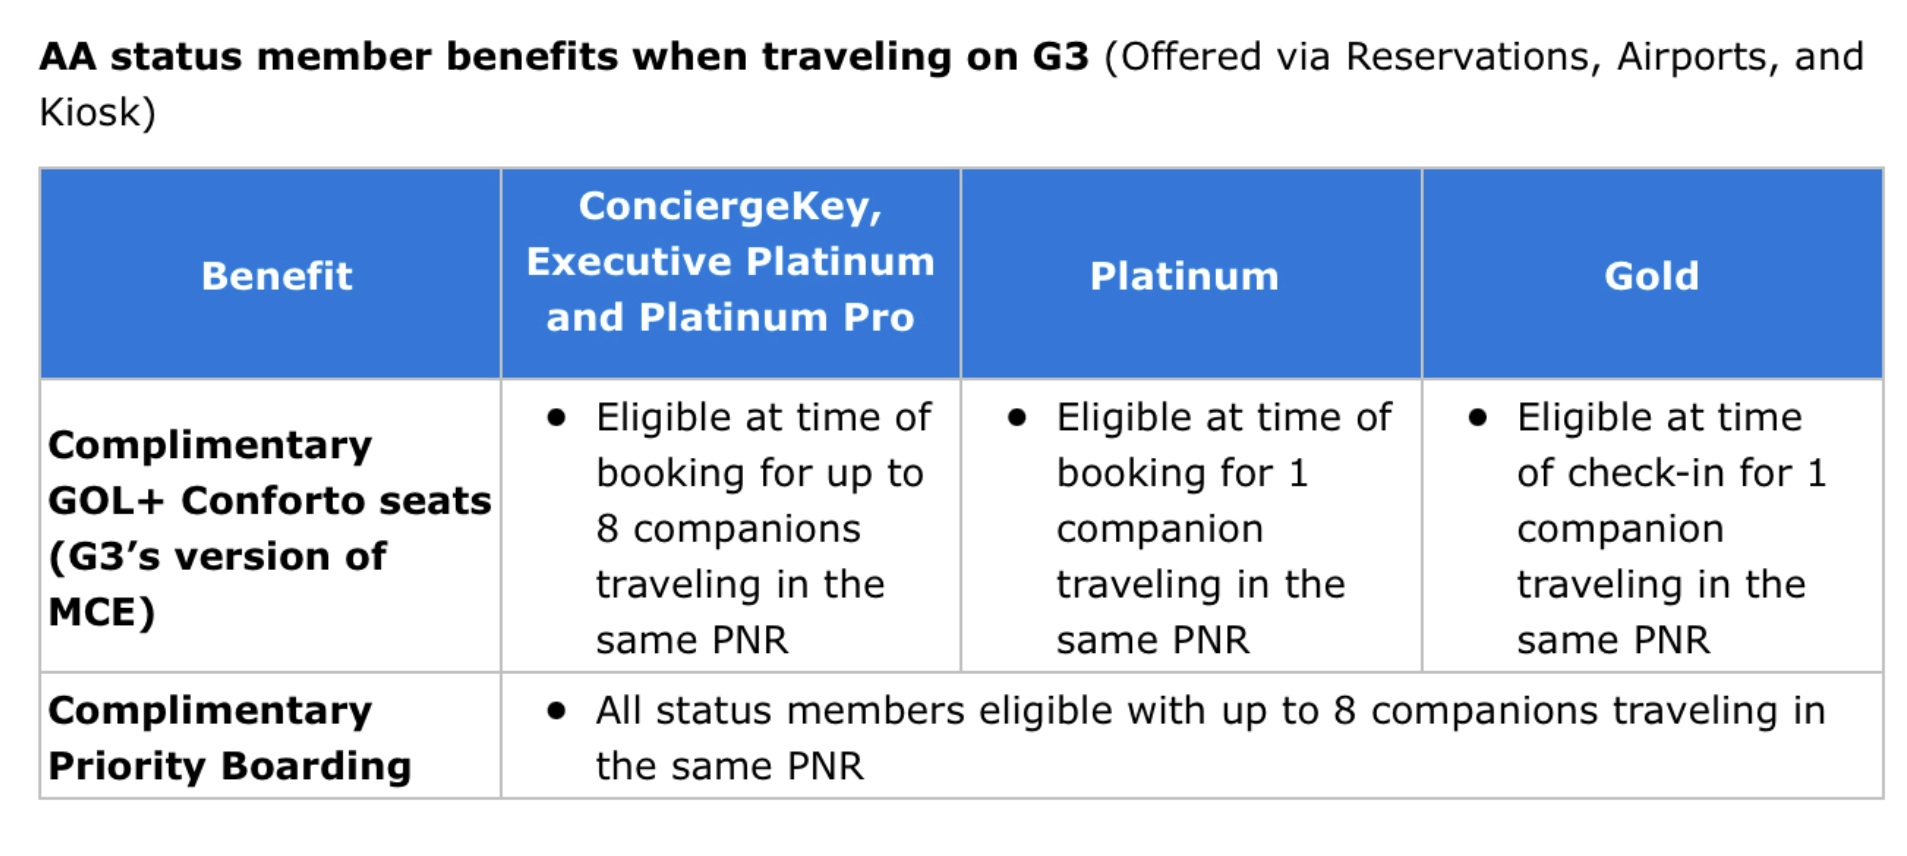 American Airlines Elites Now Receive Status Benefits When Flying Gol aa elites on gol